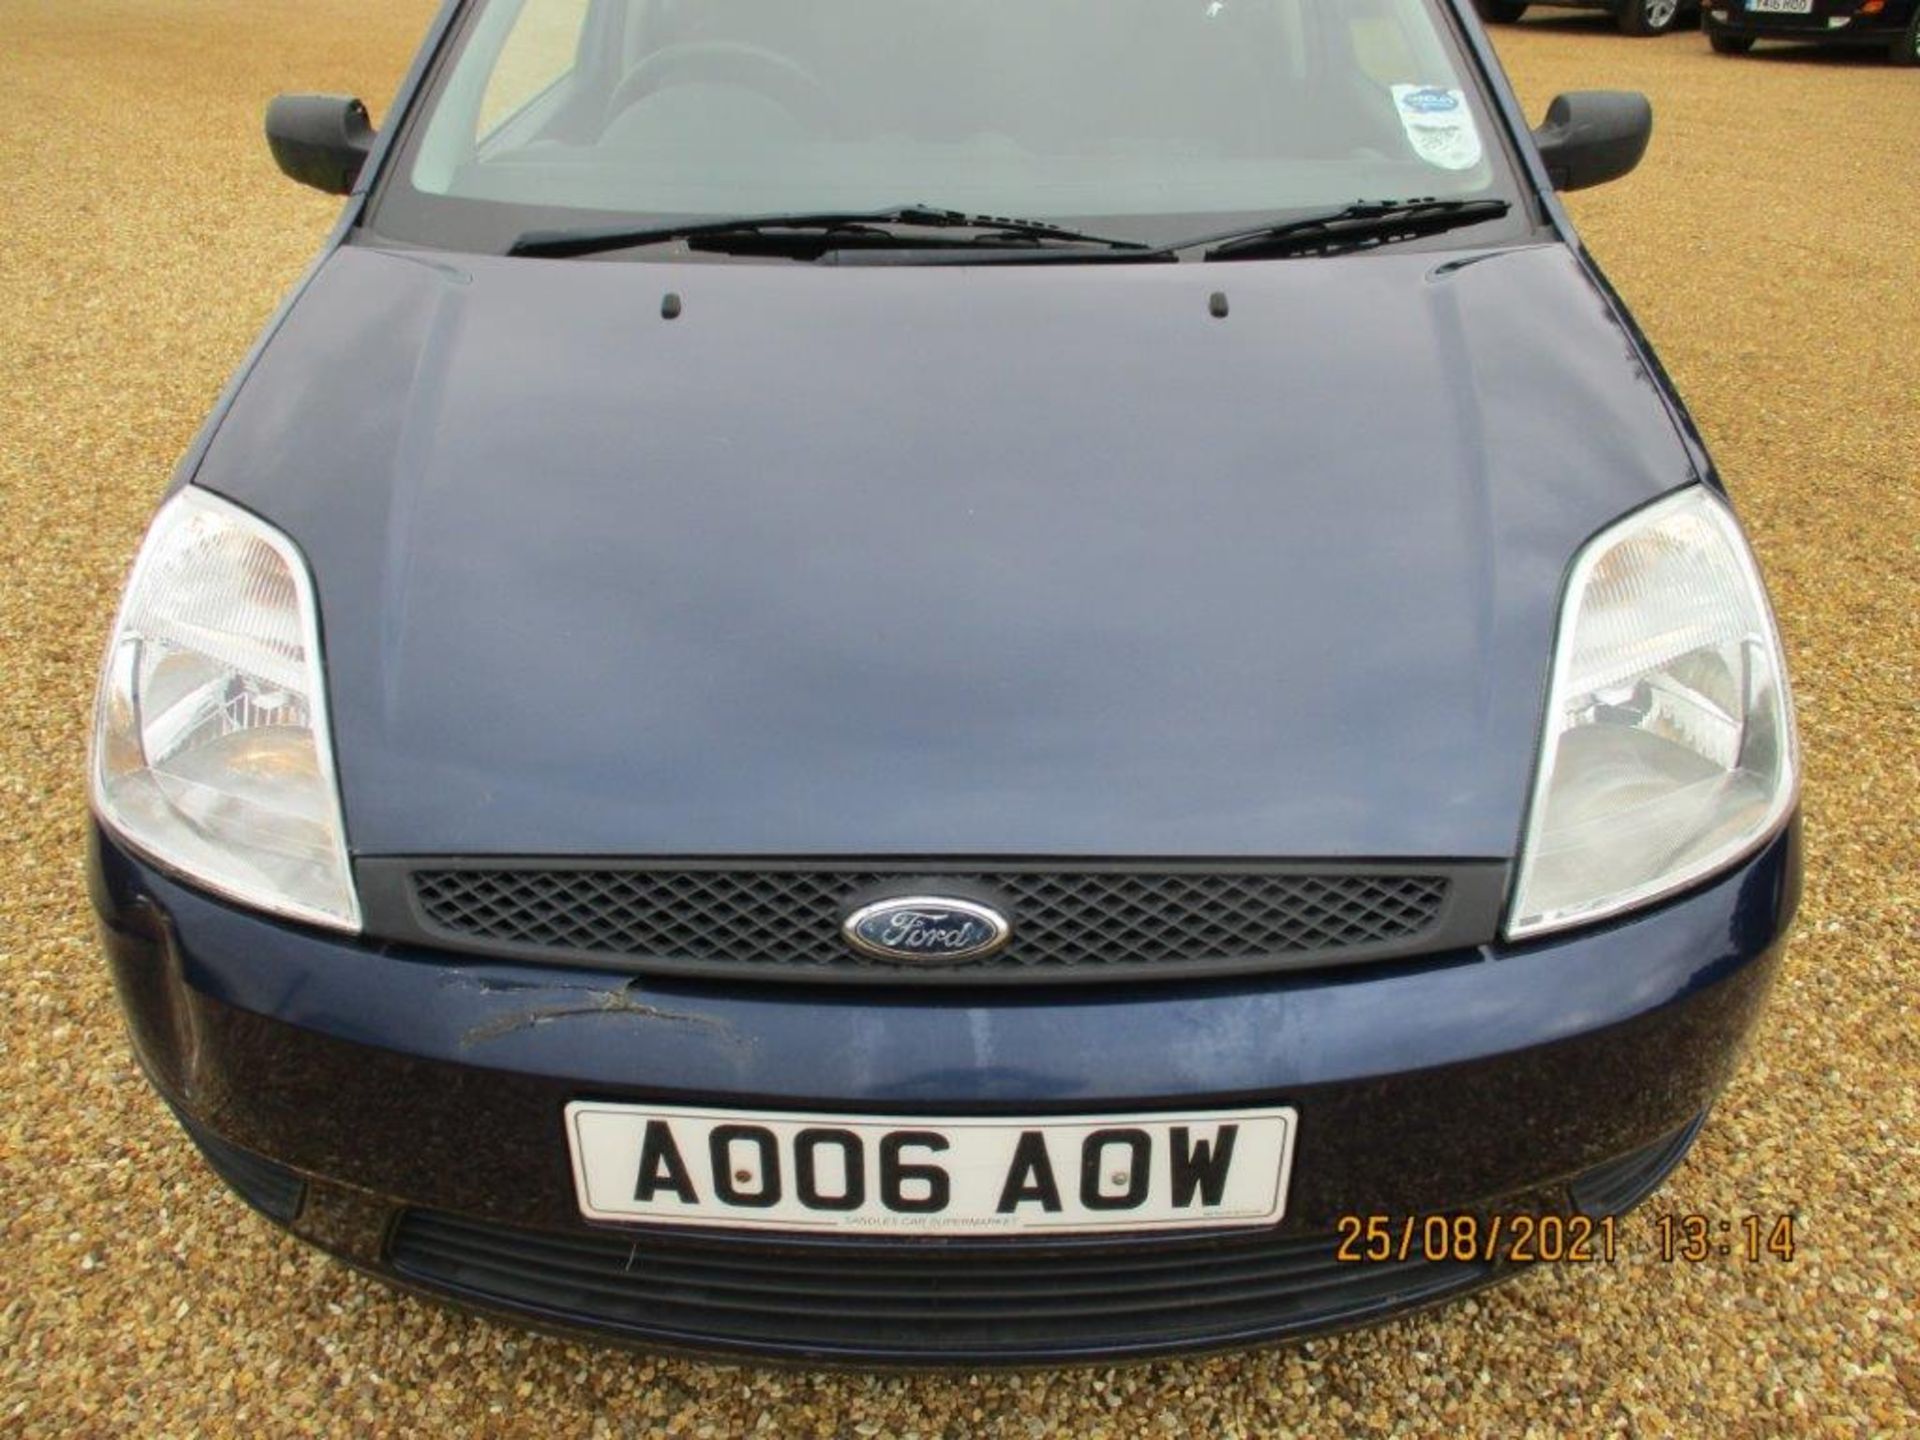 06 06 Ford Fiesta Style - Image 8 of 20